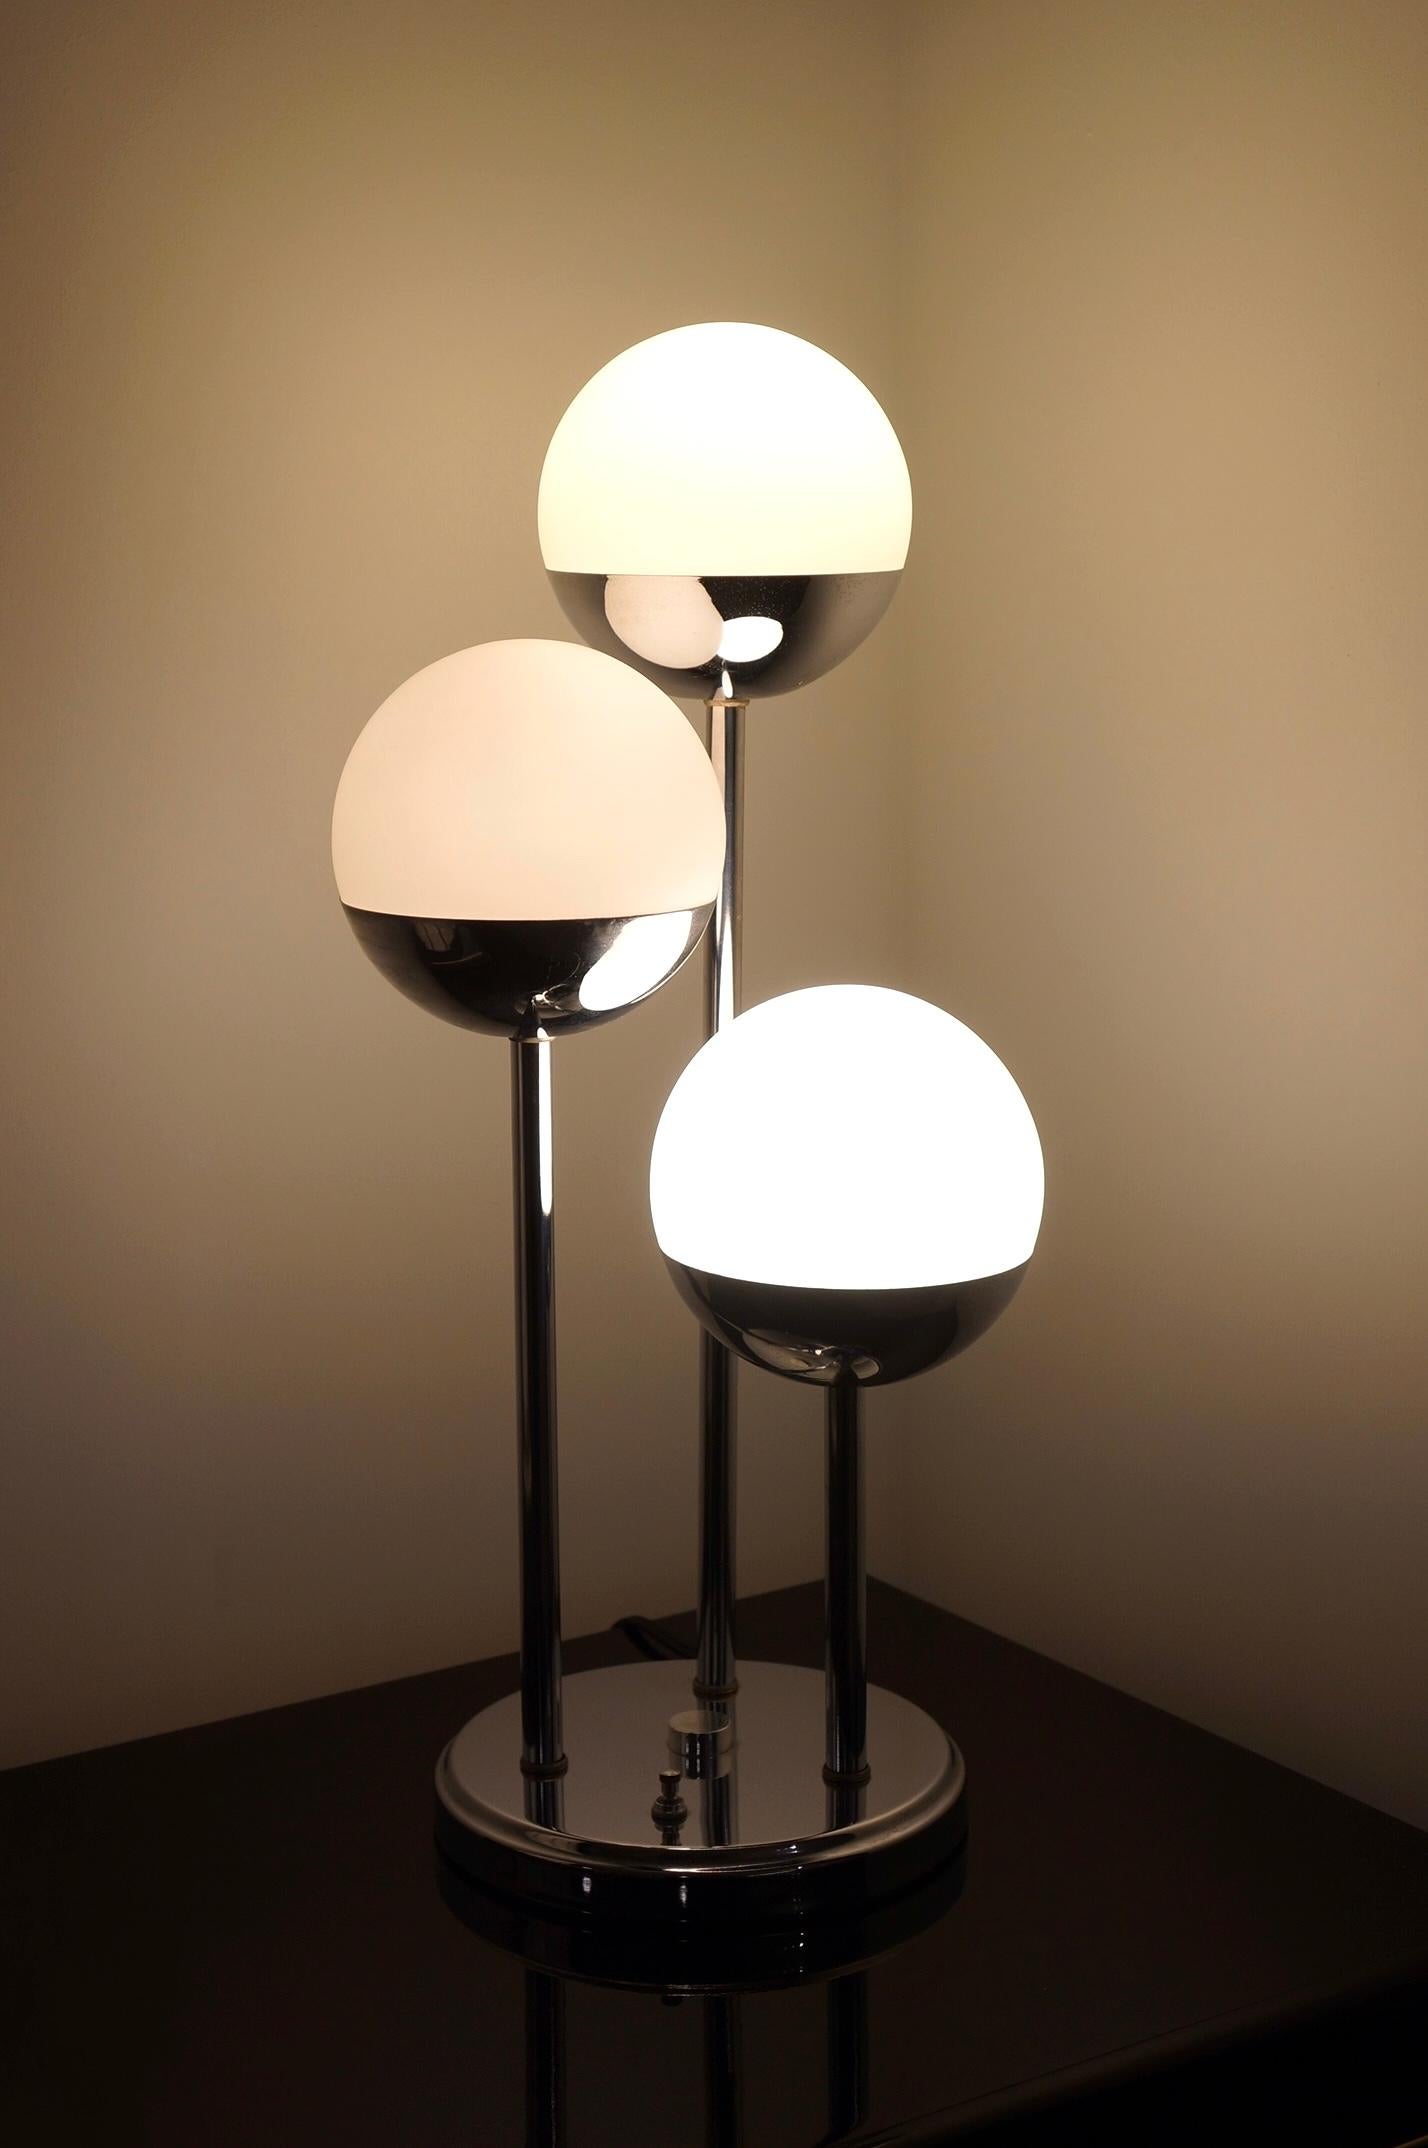 Space age style chrome table lamp with three globes. It was made in the 1970s. The base is chrome and the three globes are finished in milk glass. It’s three tiered in varying heights. It has three switches with an option to light one globe, two